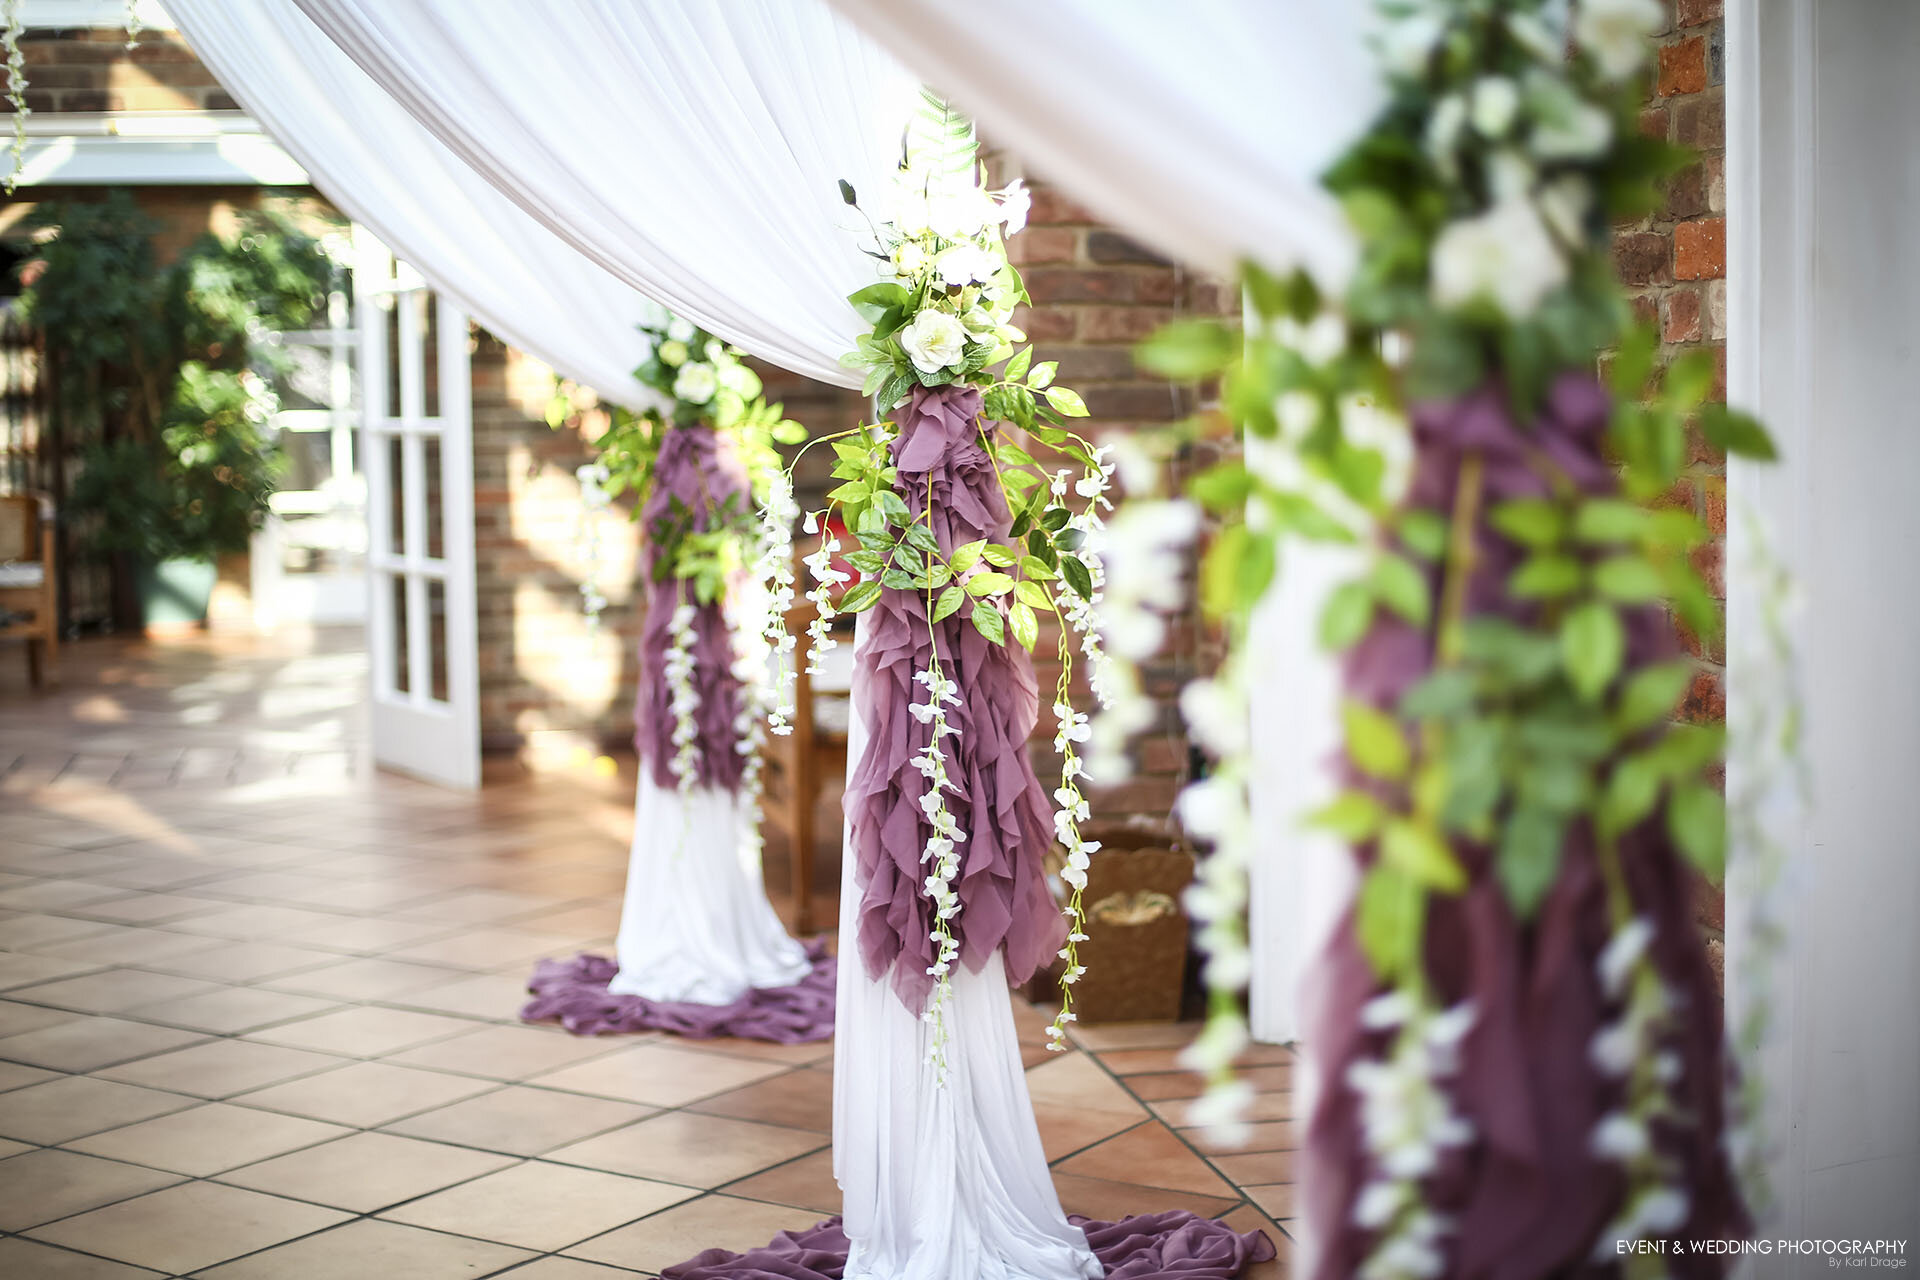 Beautifully drapes for the entrance to the bridal ceremony